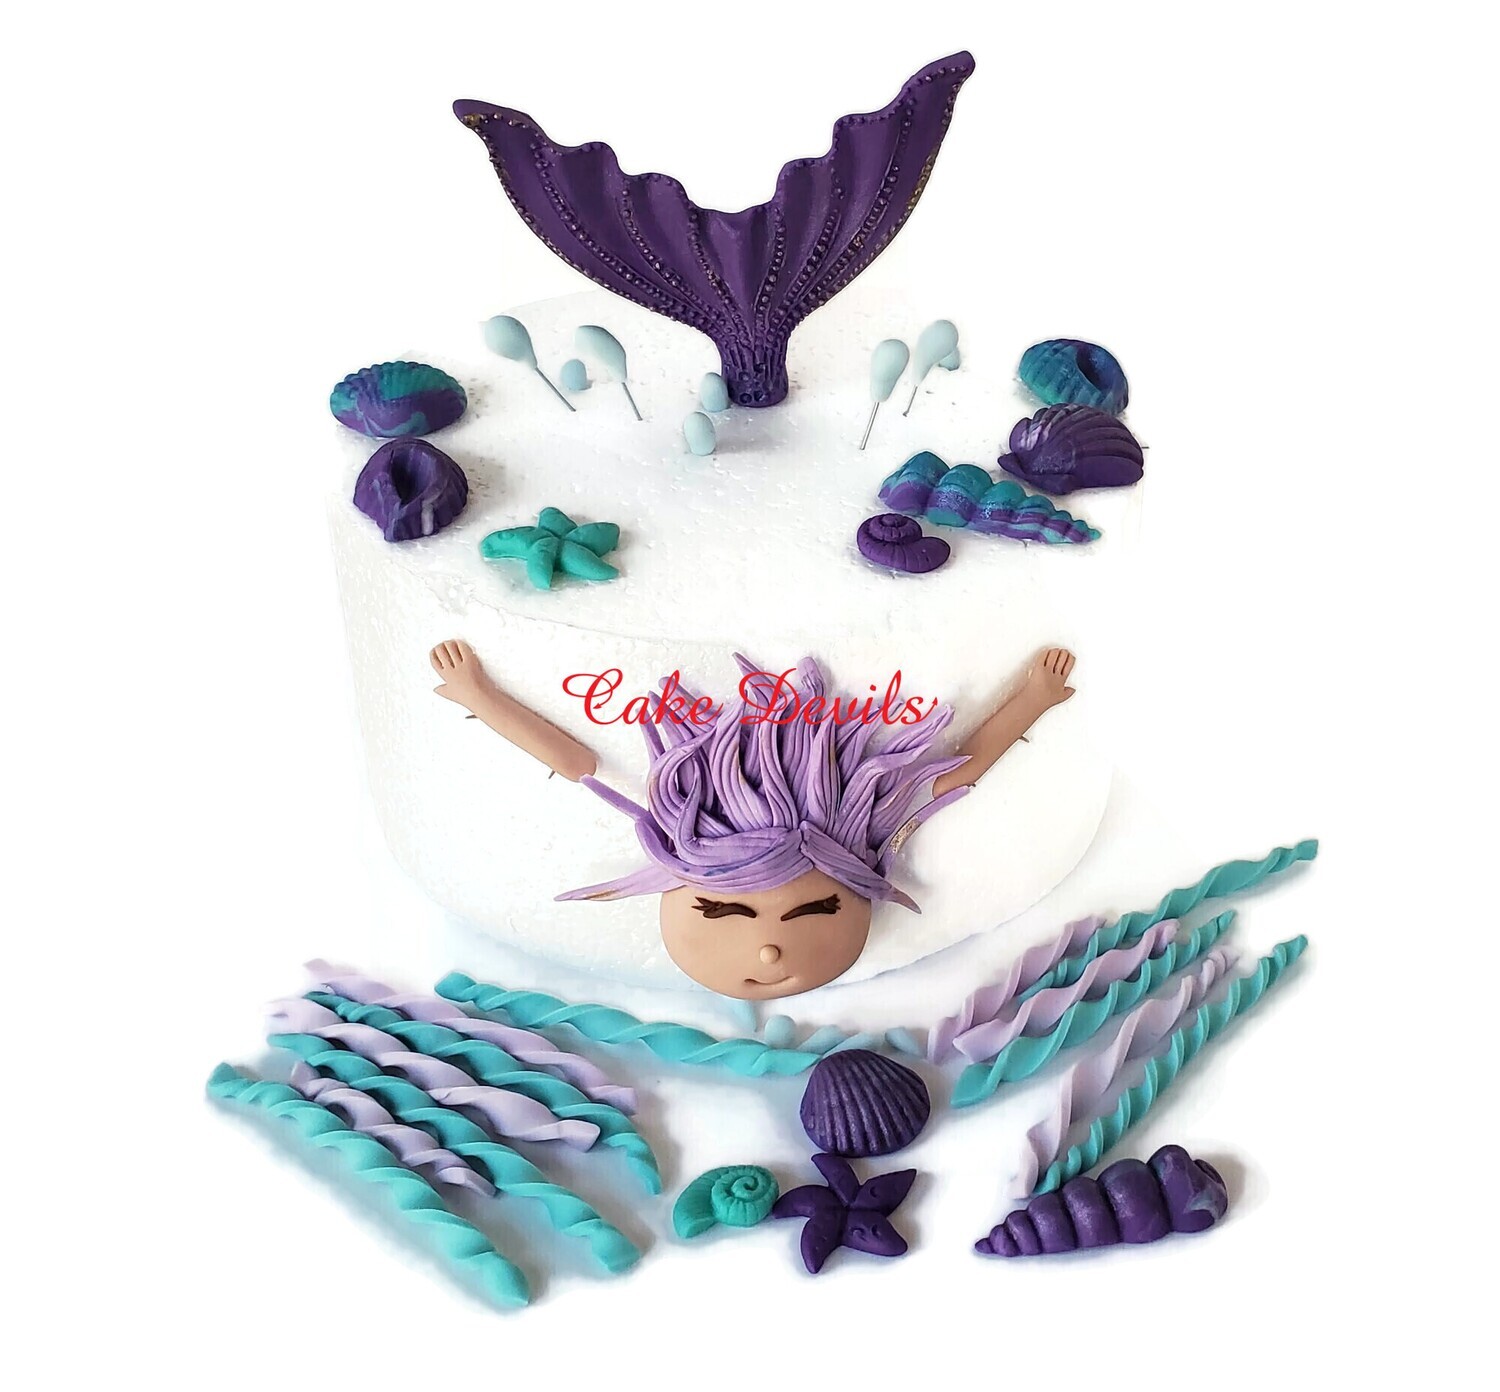 Mermaid Swimming Through Cake Fondant Cake Toppers with Sea Shell Cake Decorations